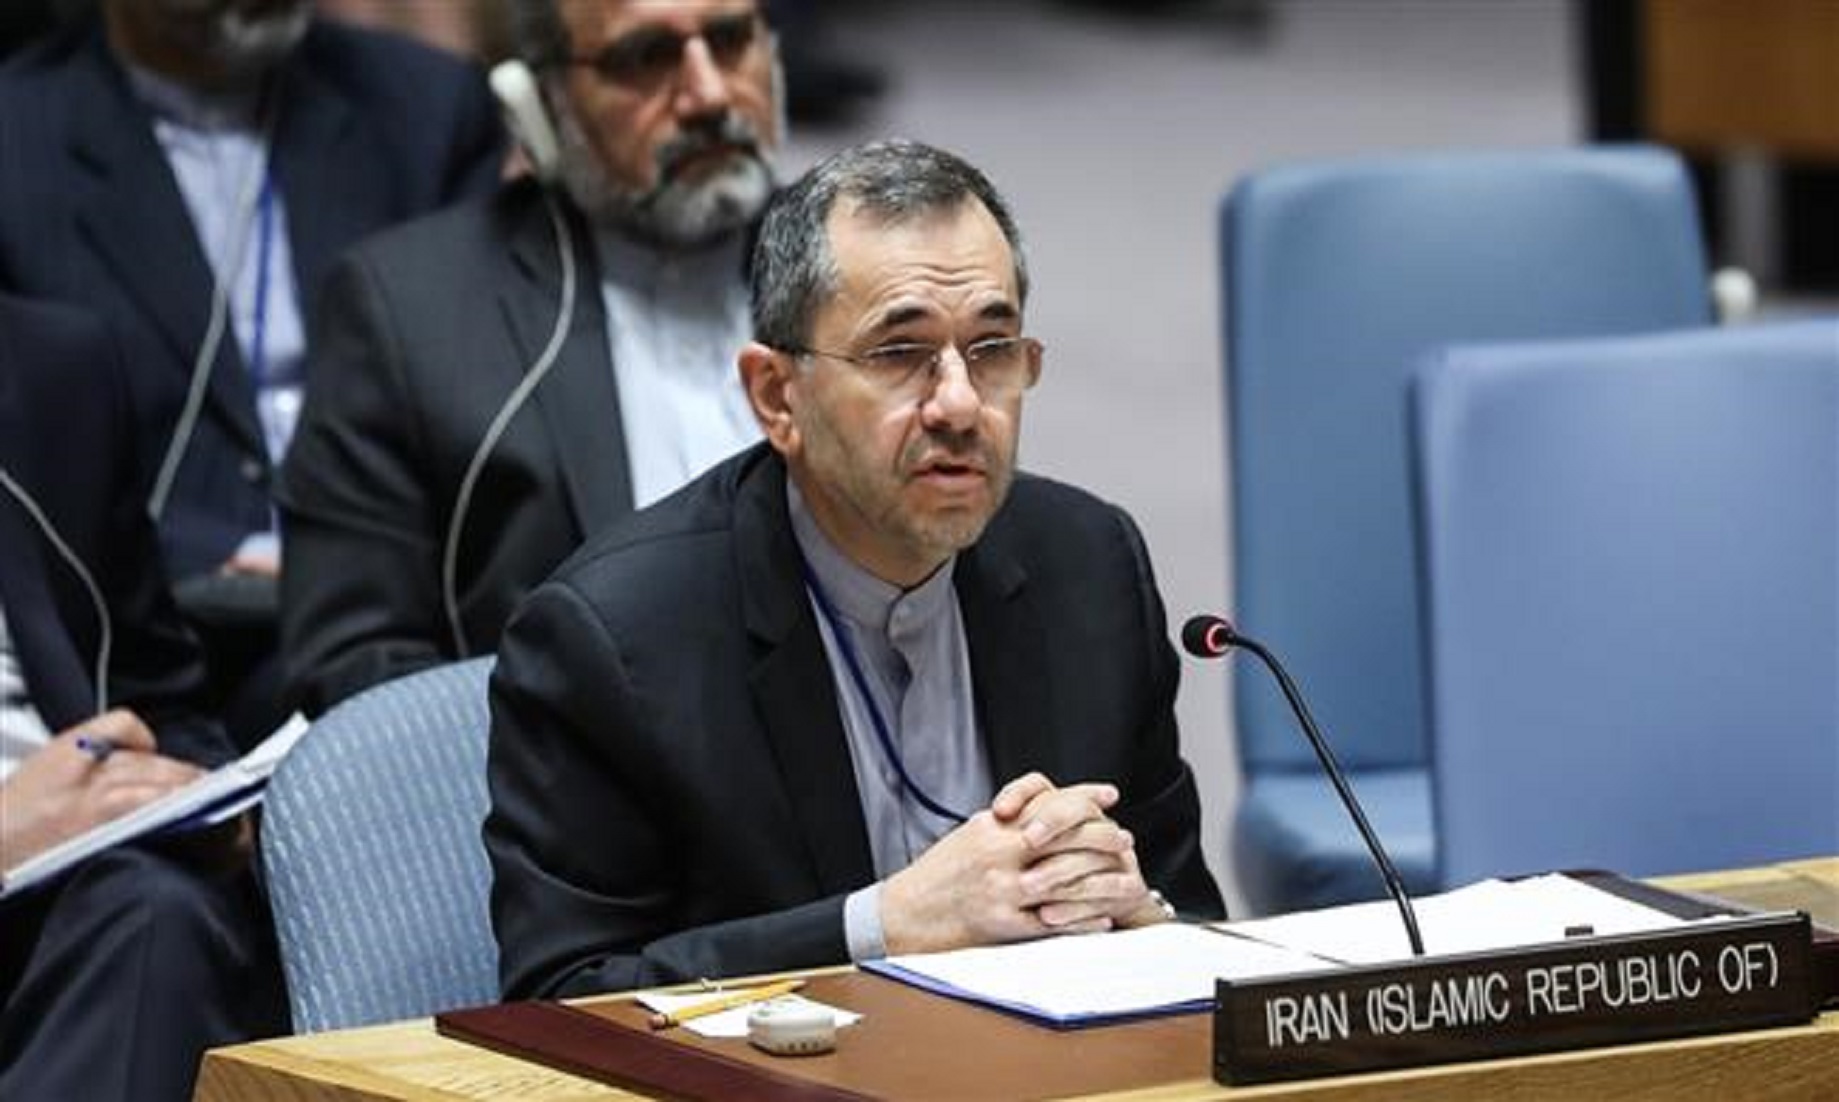 Iran Says US, Israel Main Obstacles To Mideast Free Of Nuclear Weapons